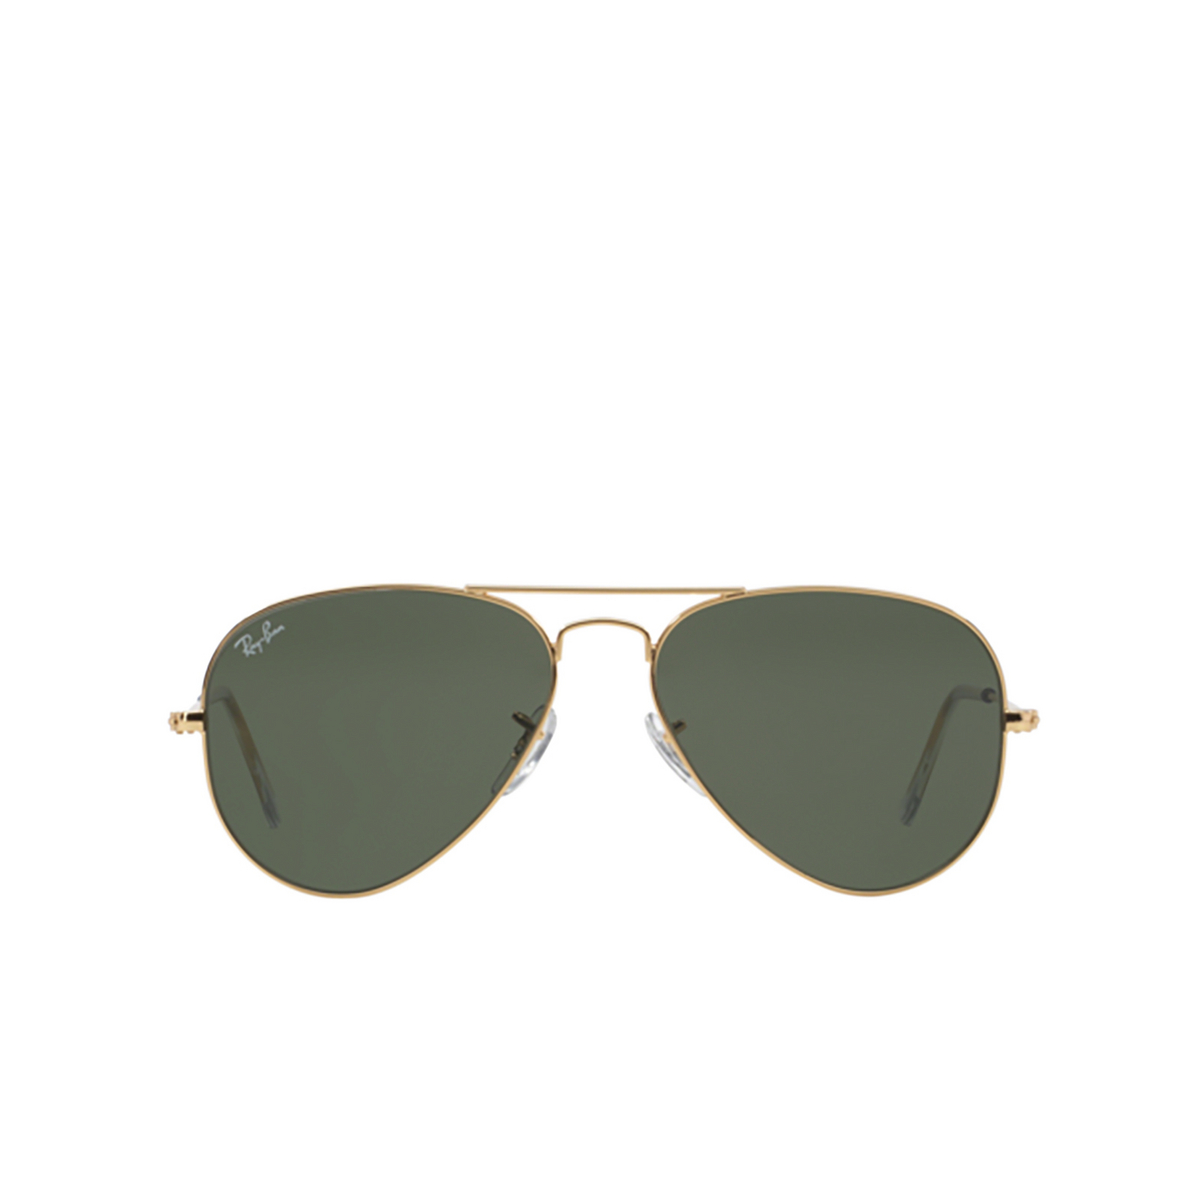 Ray-Ban AVIATOR LARGE METAL Sunglasses W3234 ARISTA - front view